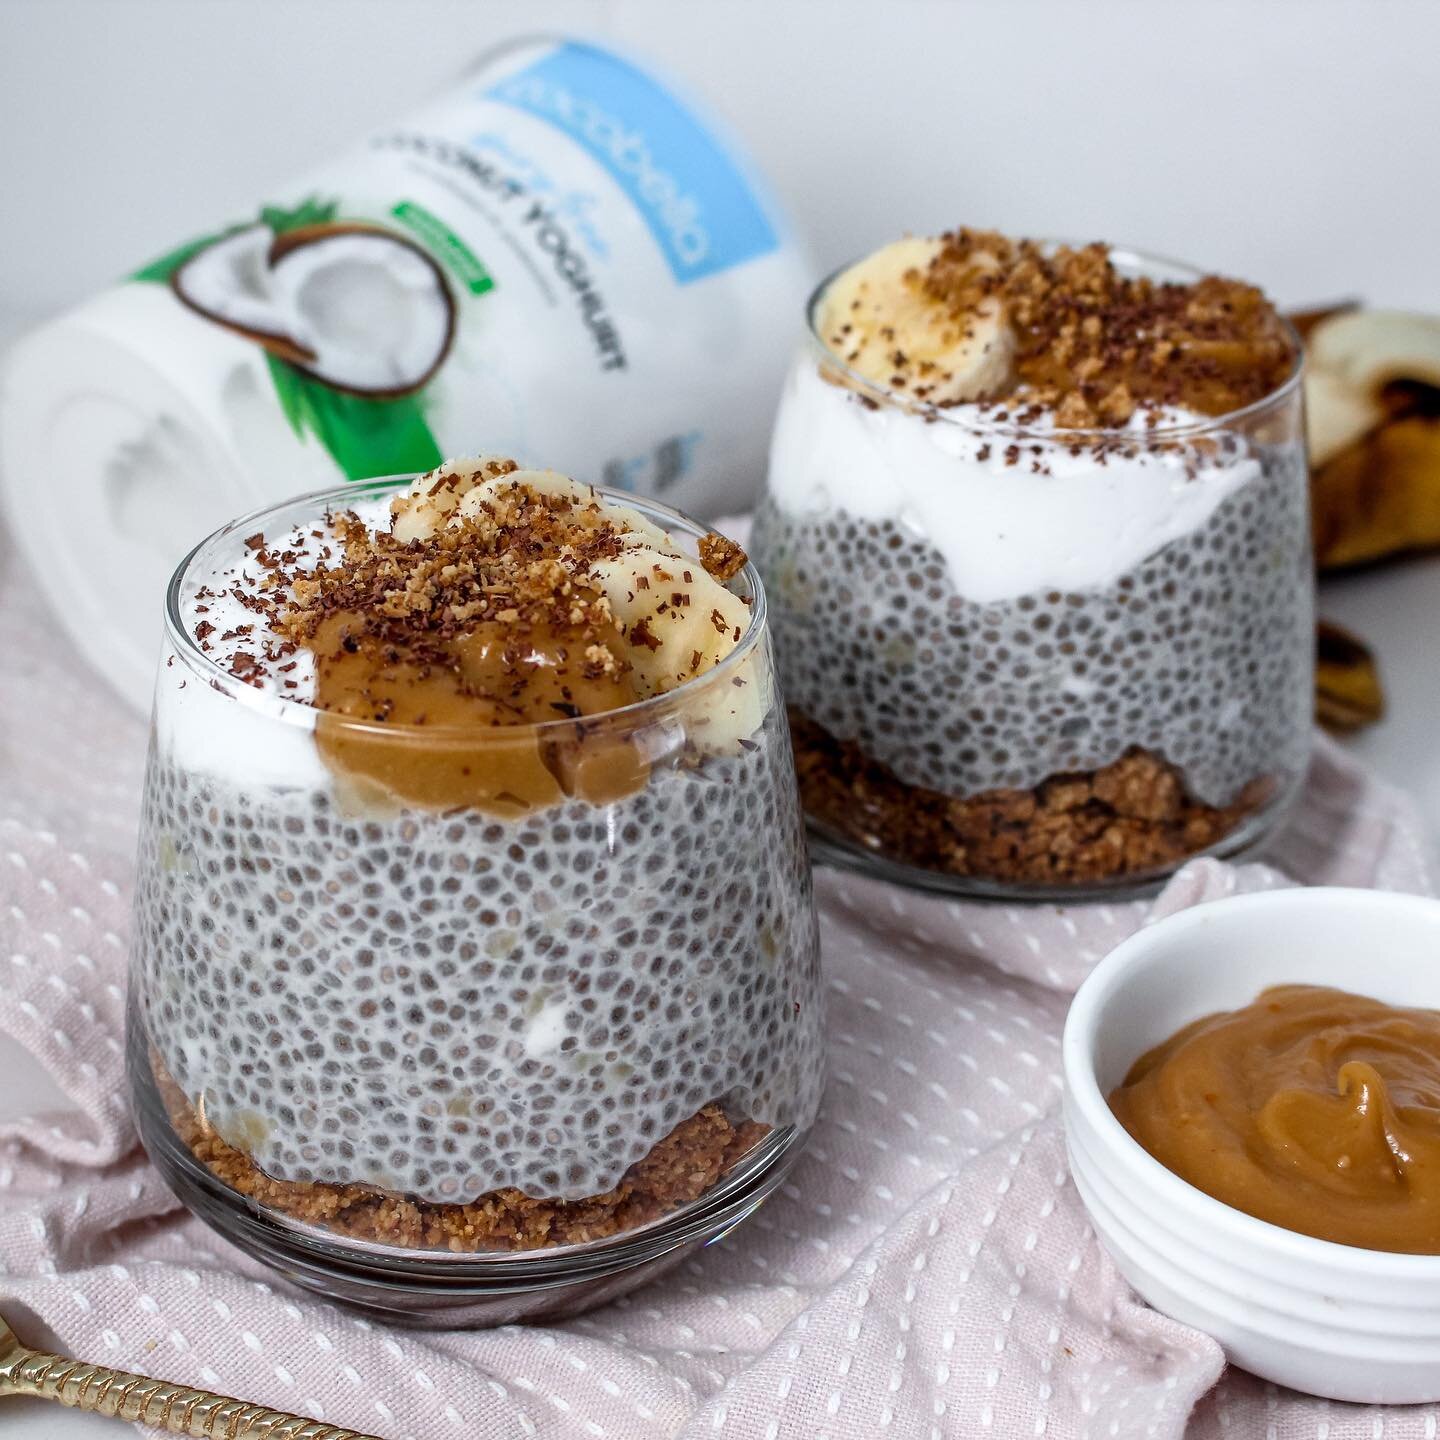 BANOFFEE PIE CHIA PUDDING JARS 🍌

Healthy enough for breakfast, but decadent enough to also be a dessert - I don&rsquo;t know about you, but that&rsquo;s my kinda brekky 🤩

I never use to be a fan of chia puddings, but after a lot of trial and erro